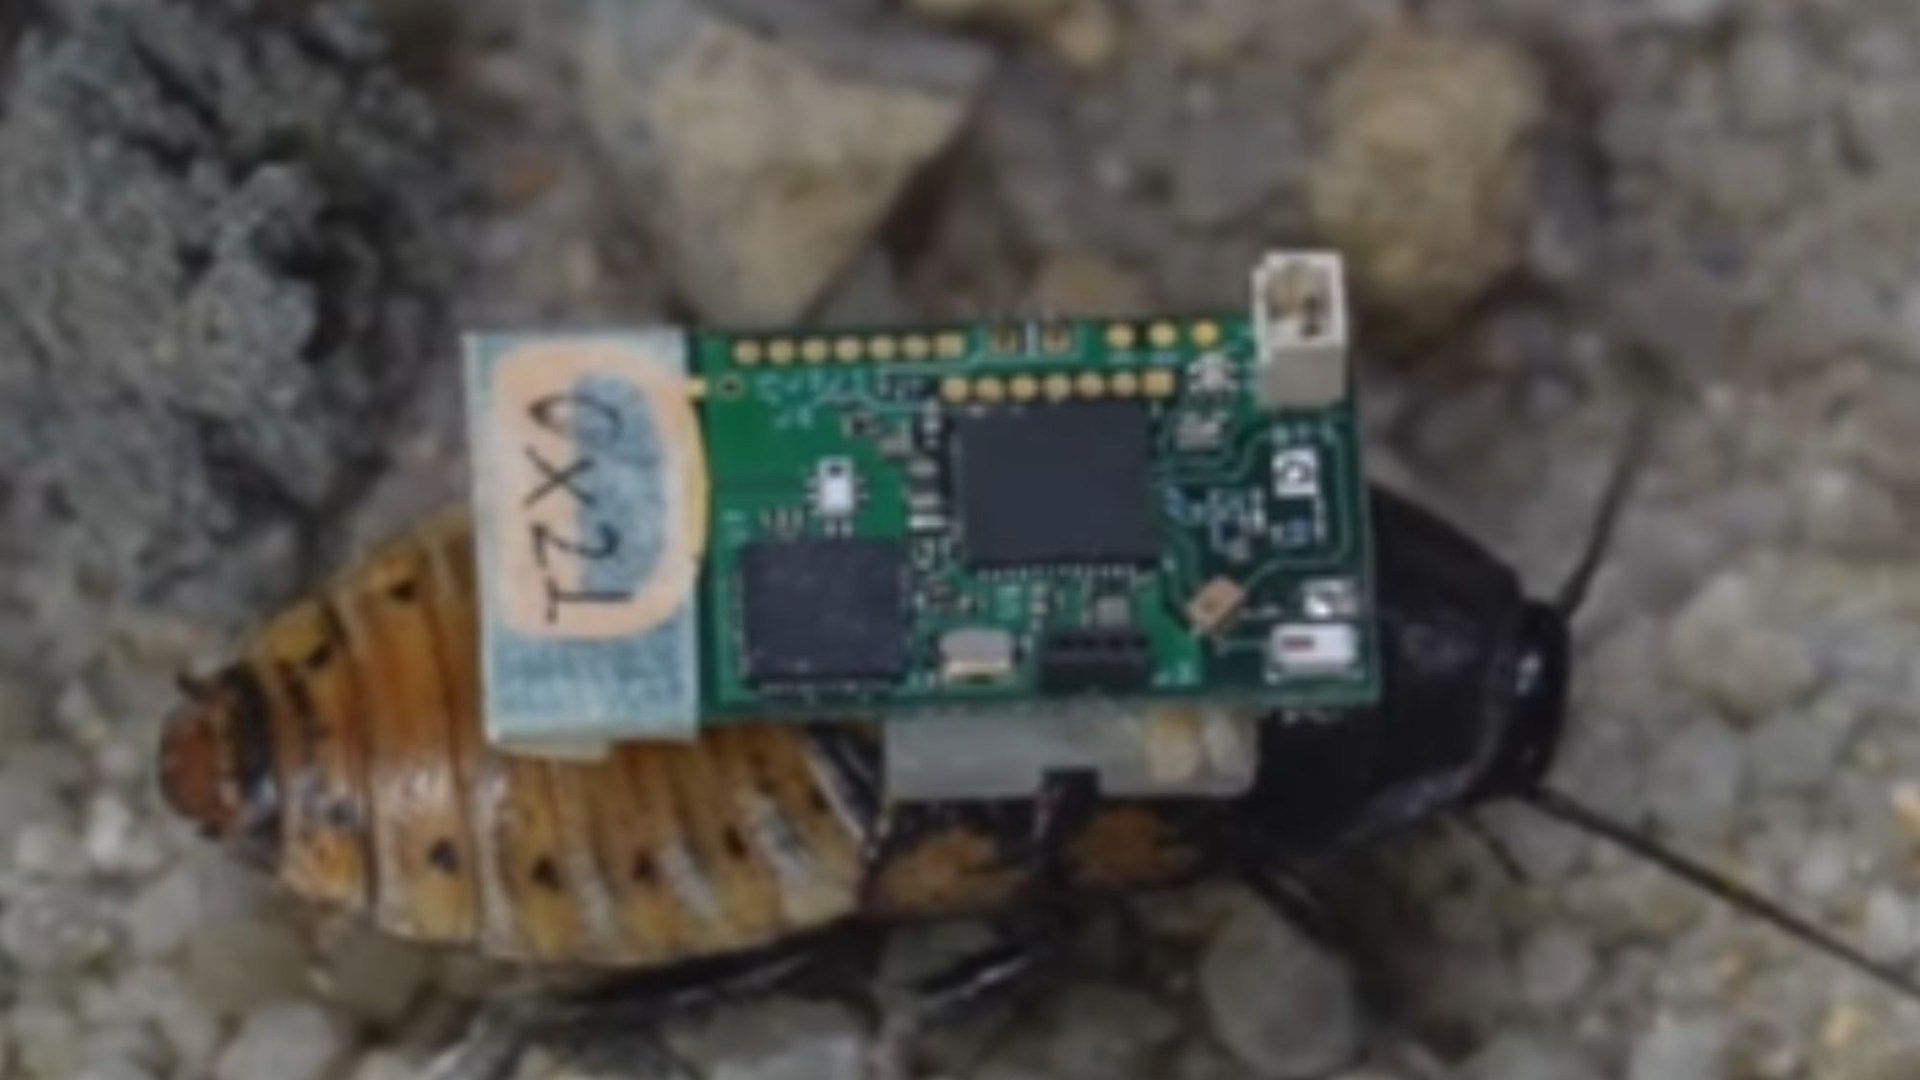 Scientists create cyborg cockroaches with robot brains trained to sneak through tiny gaps & be controlled by humans [Video]